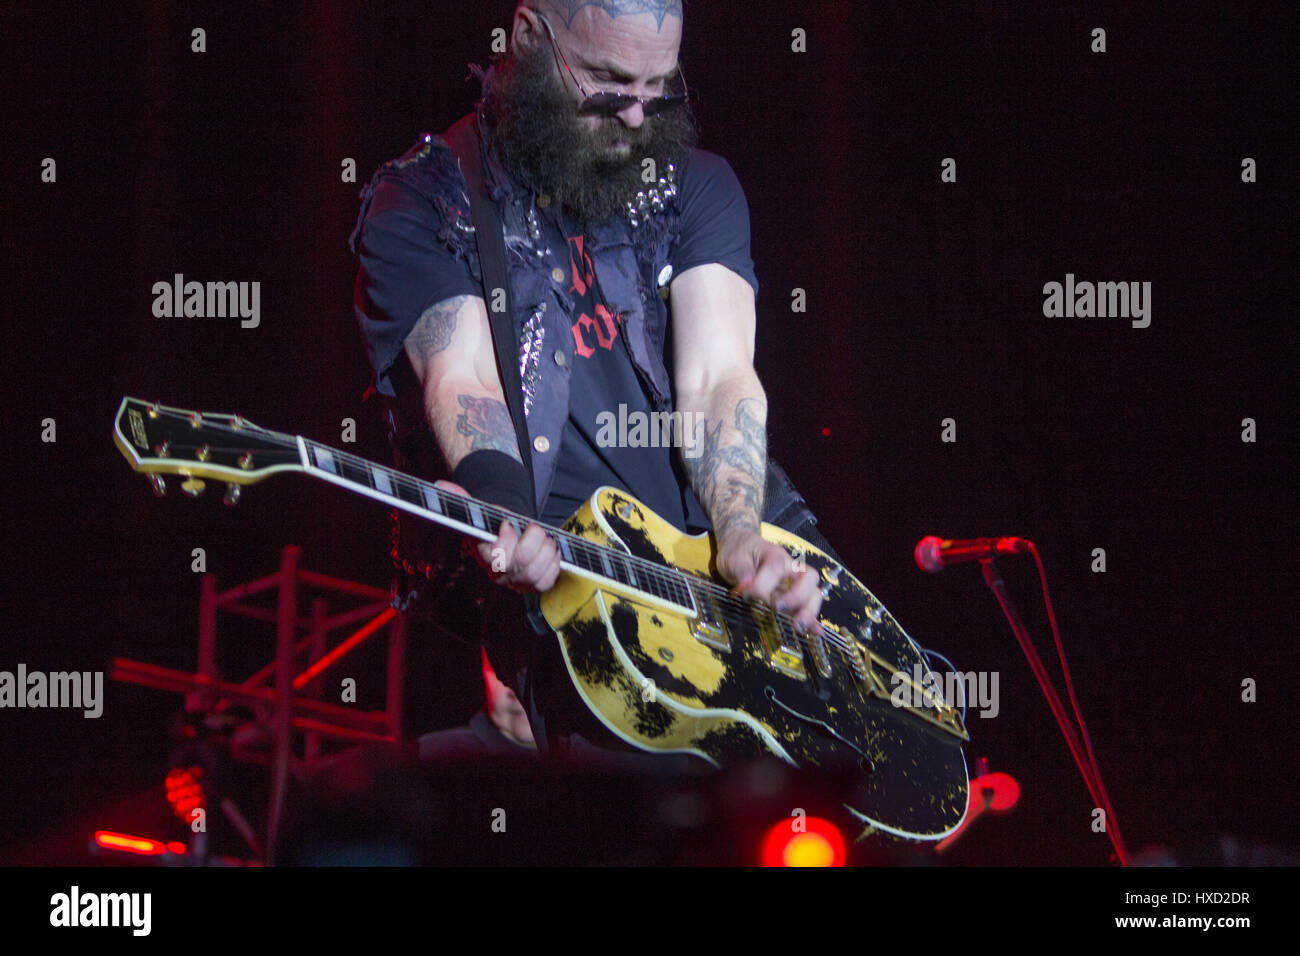 Tim Armstrong member of the band Rancid performs at Estereopicnic Music Festival on March 23, 2017 in Bogota, Colombia Stock Photo